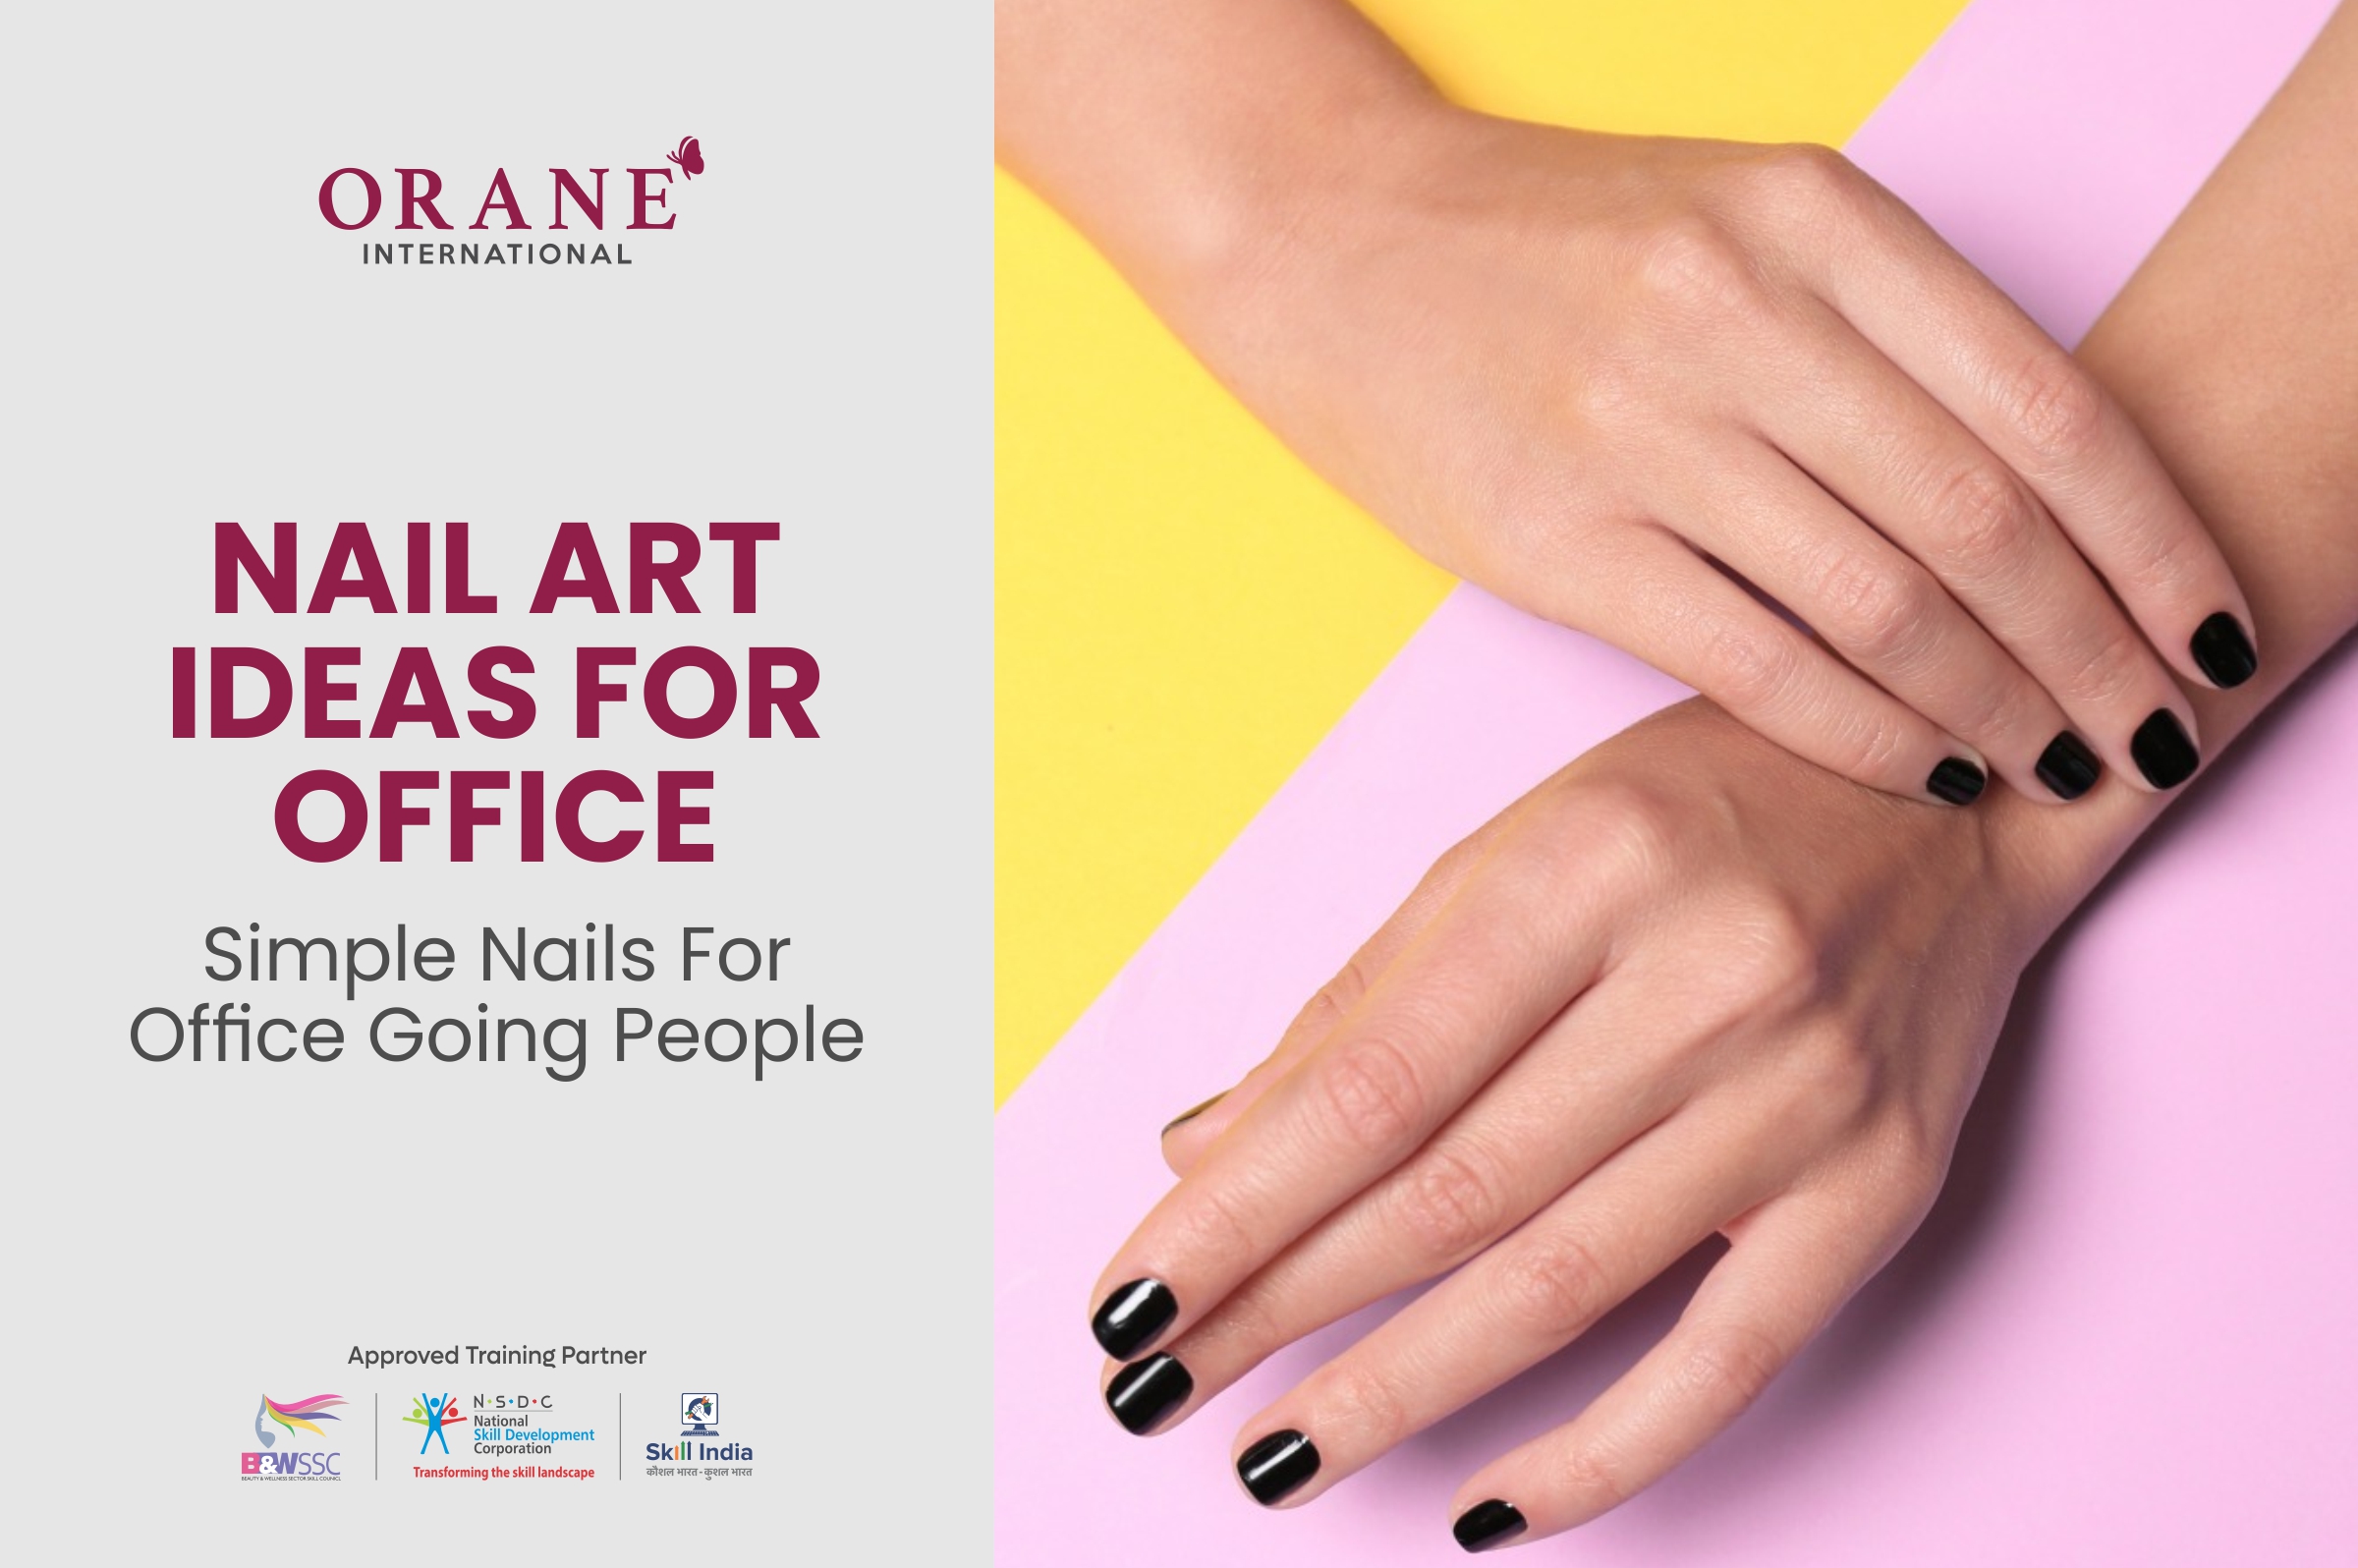 5 Simple Nail Art Ideas For Office Going People! - Orane Beauty Institute